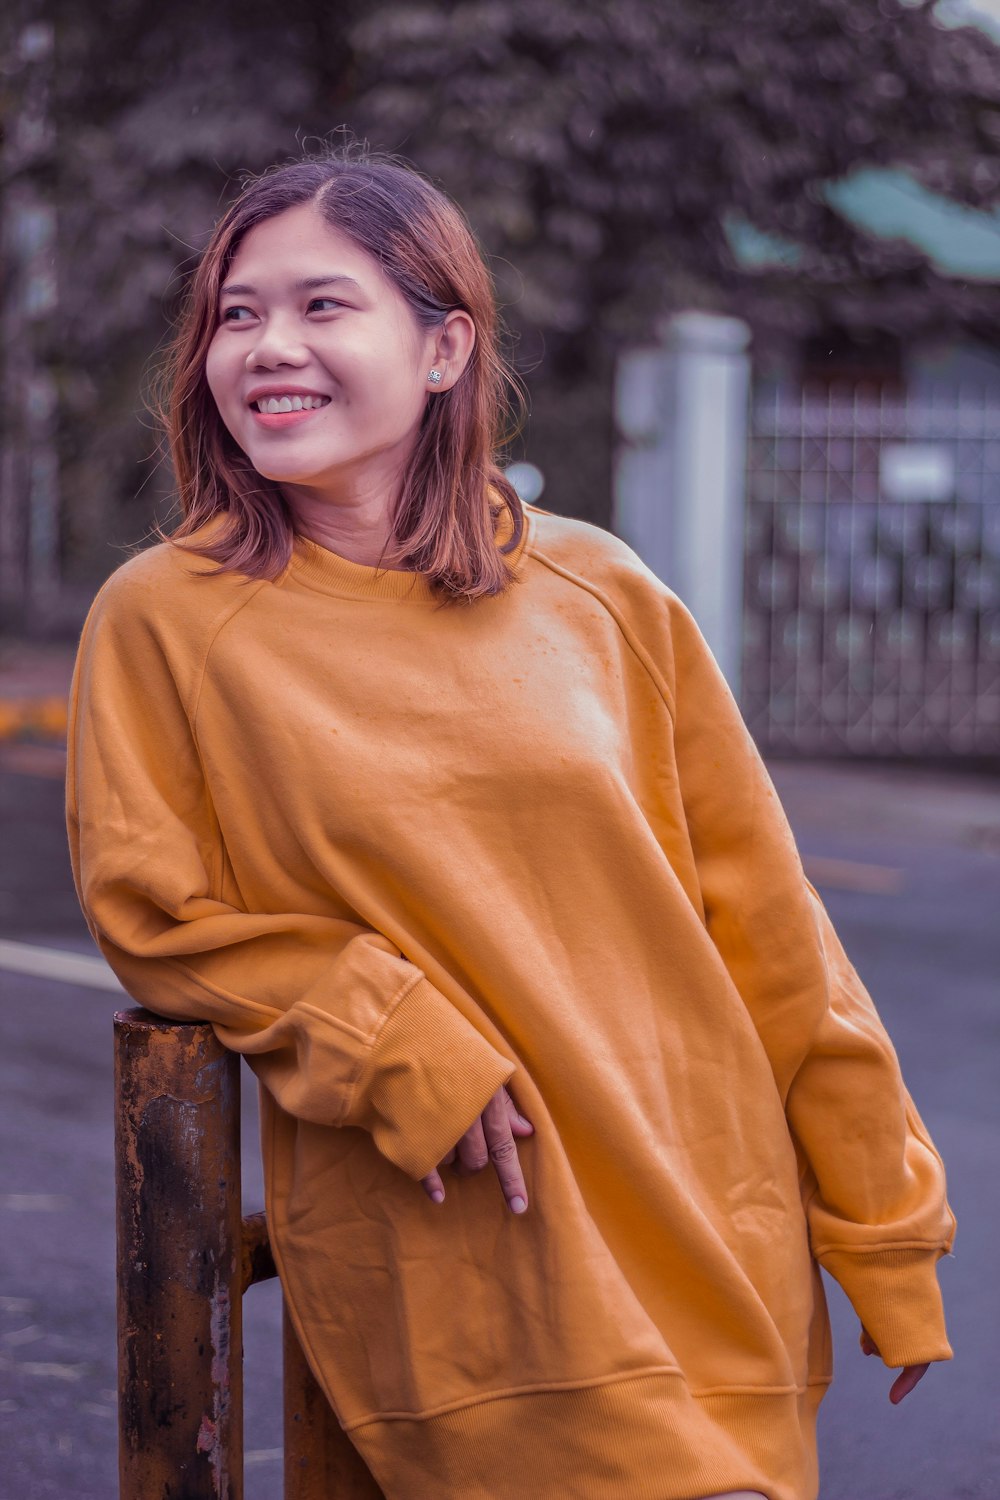 a woman standing next to a fence wearing a yellow sweatshirt